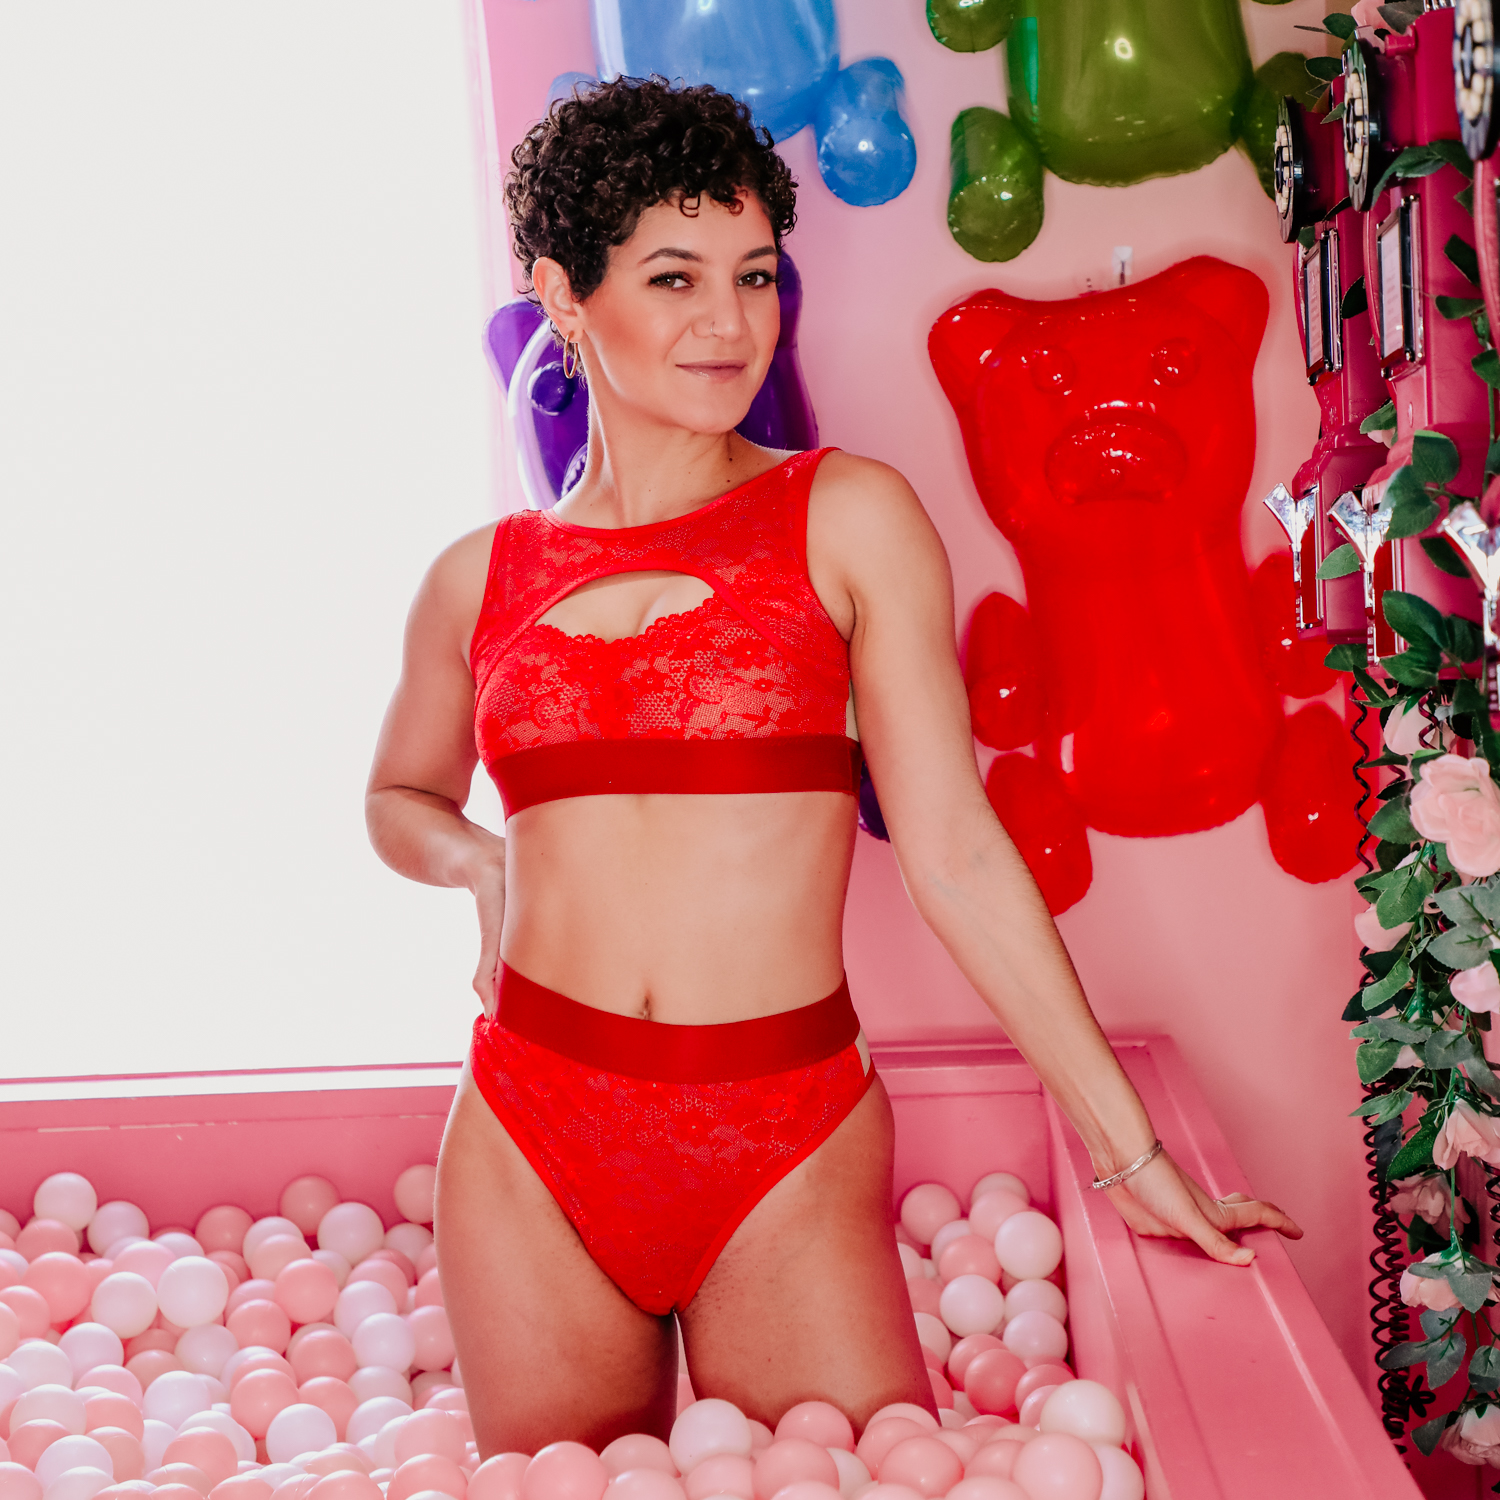 Sew Lingerie - Make Size-Inclusive Bras Panties Swimwear & More by Maddie  Kulig